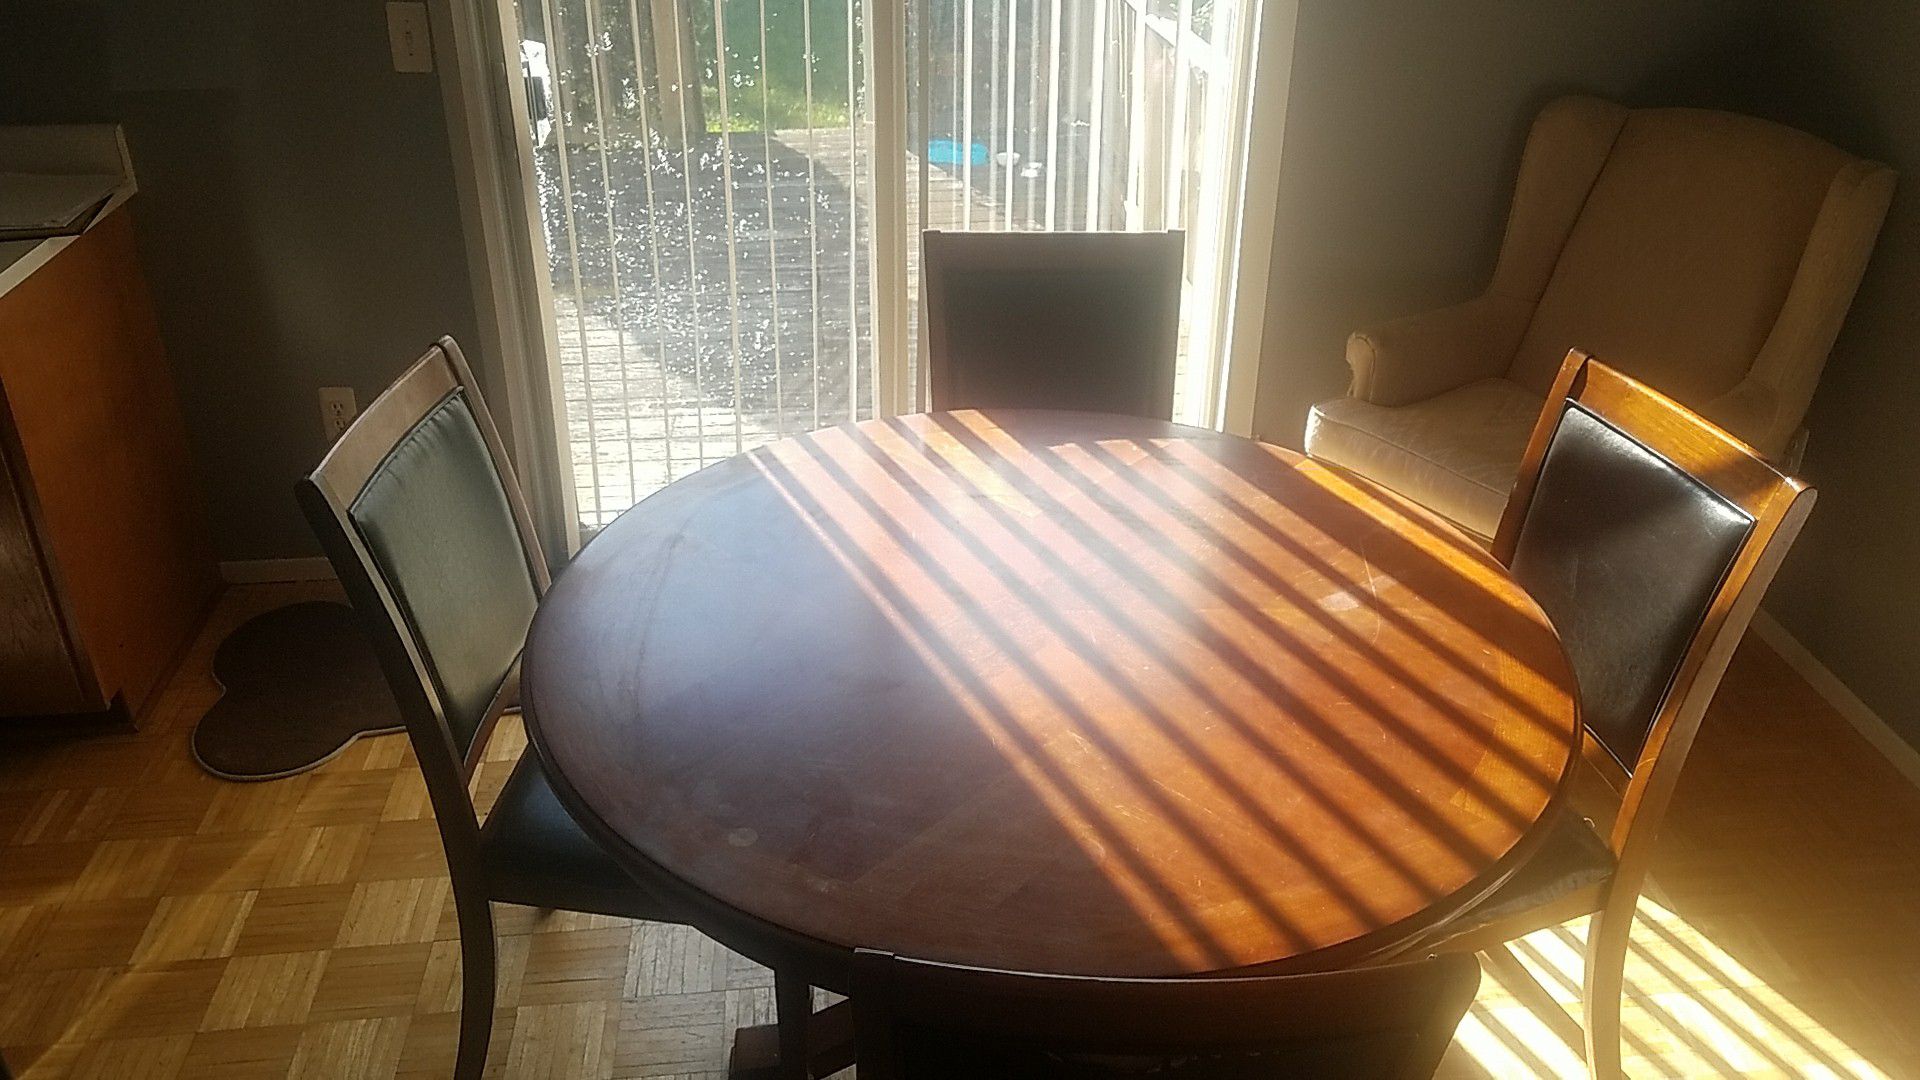 4 chairs and round Table Dining Room or Breakfast knook Table